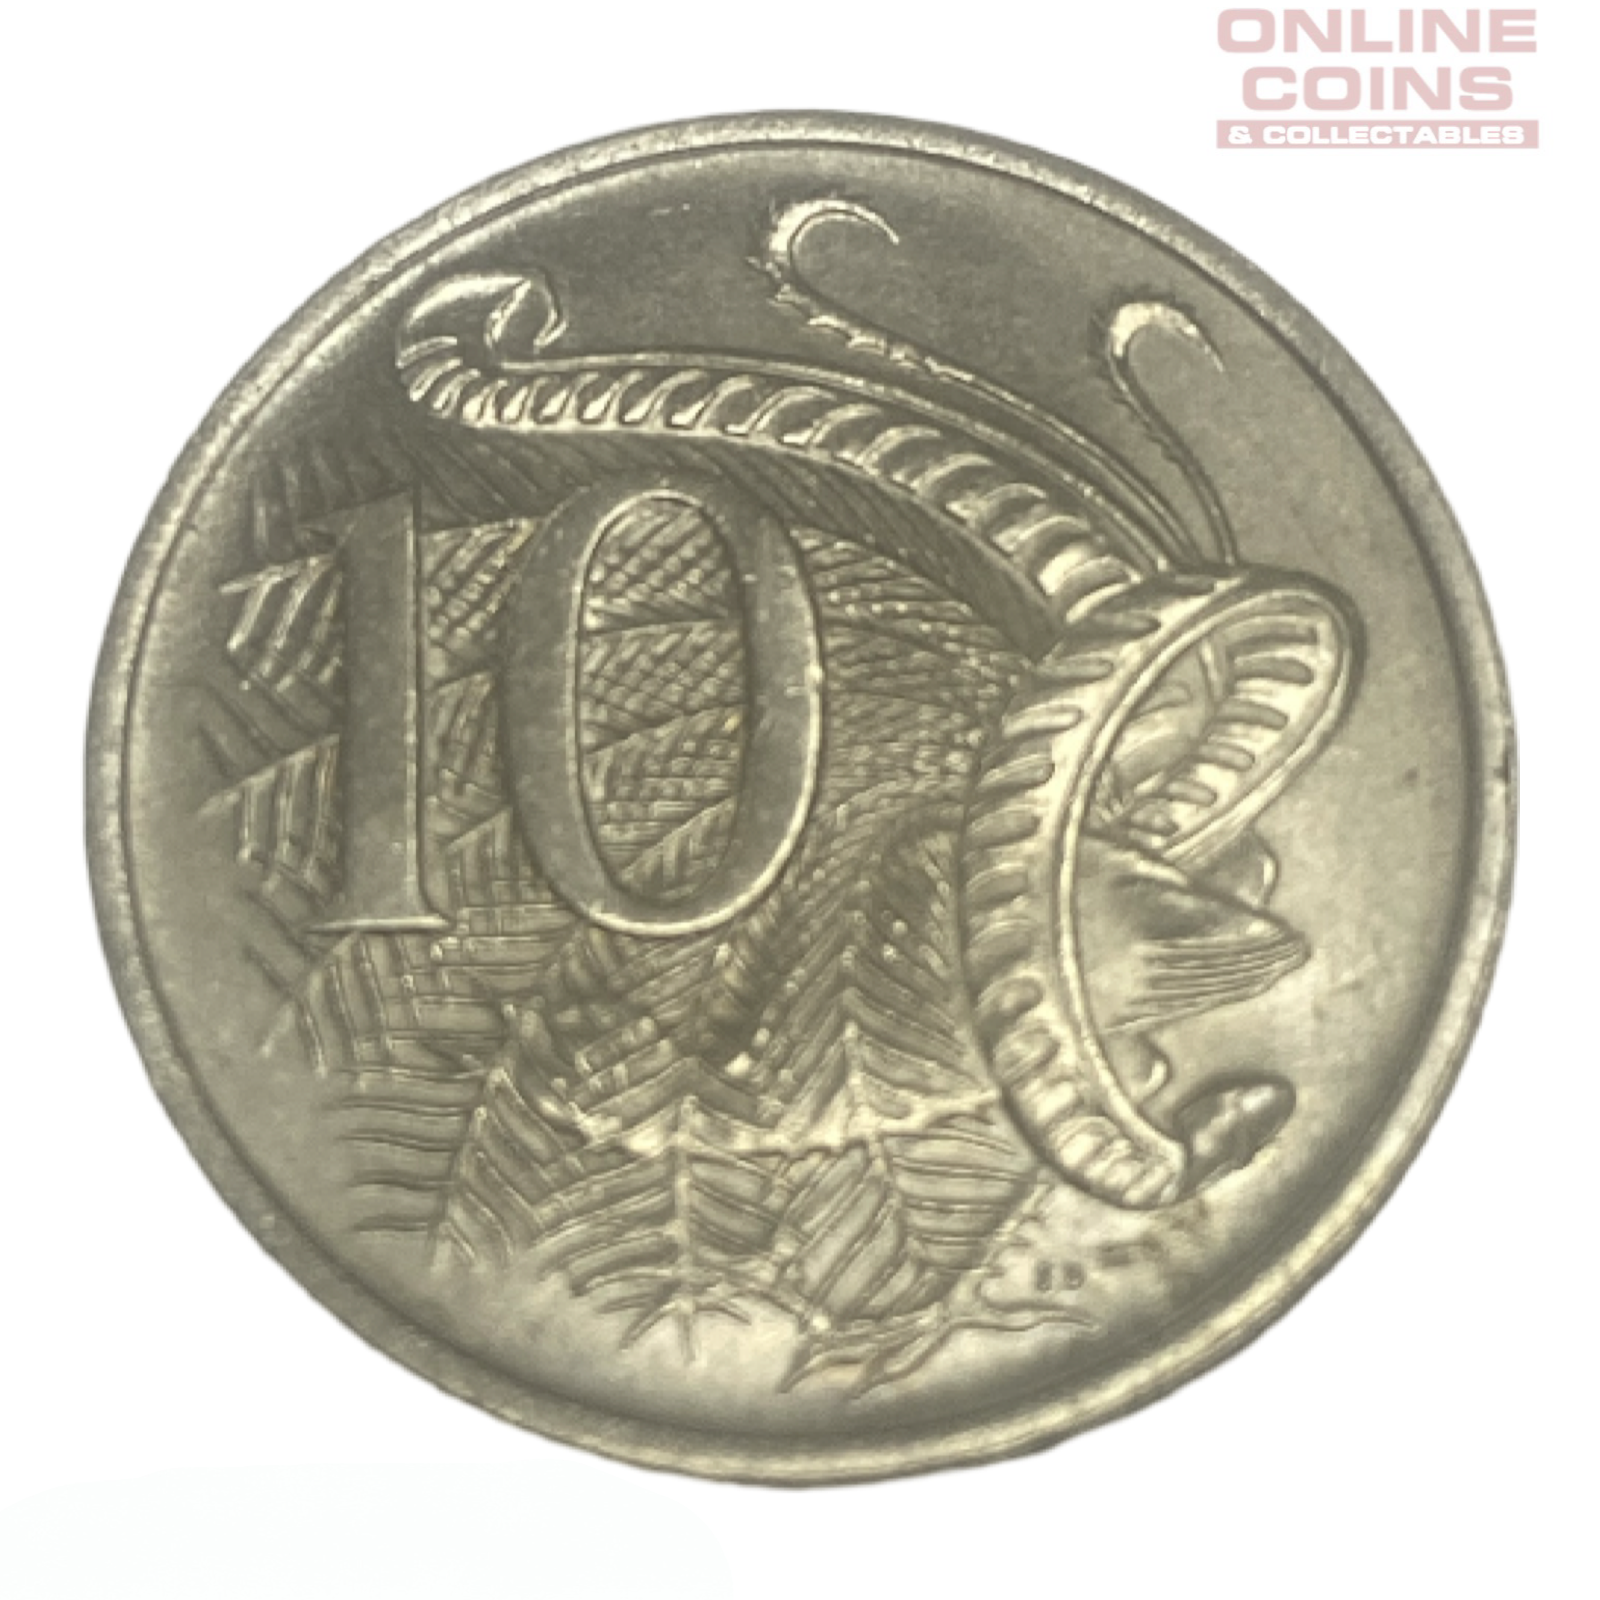 1968 Australian 10c Coin - Almost Uncirculated from Roll